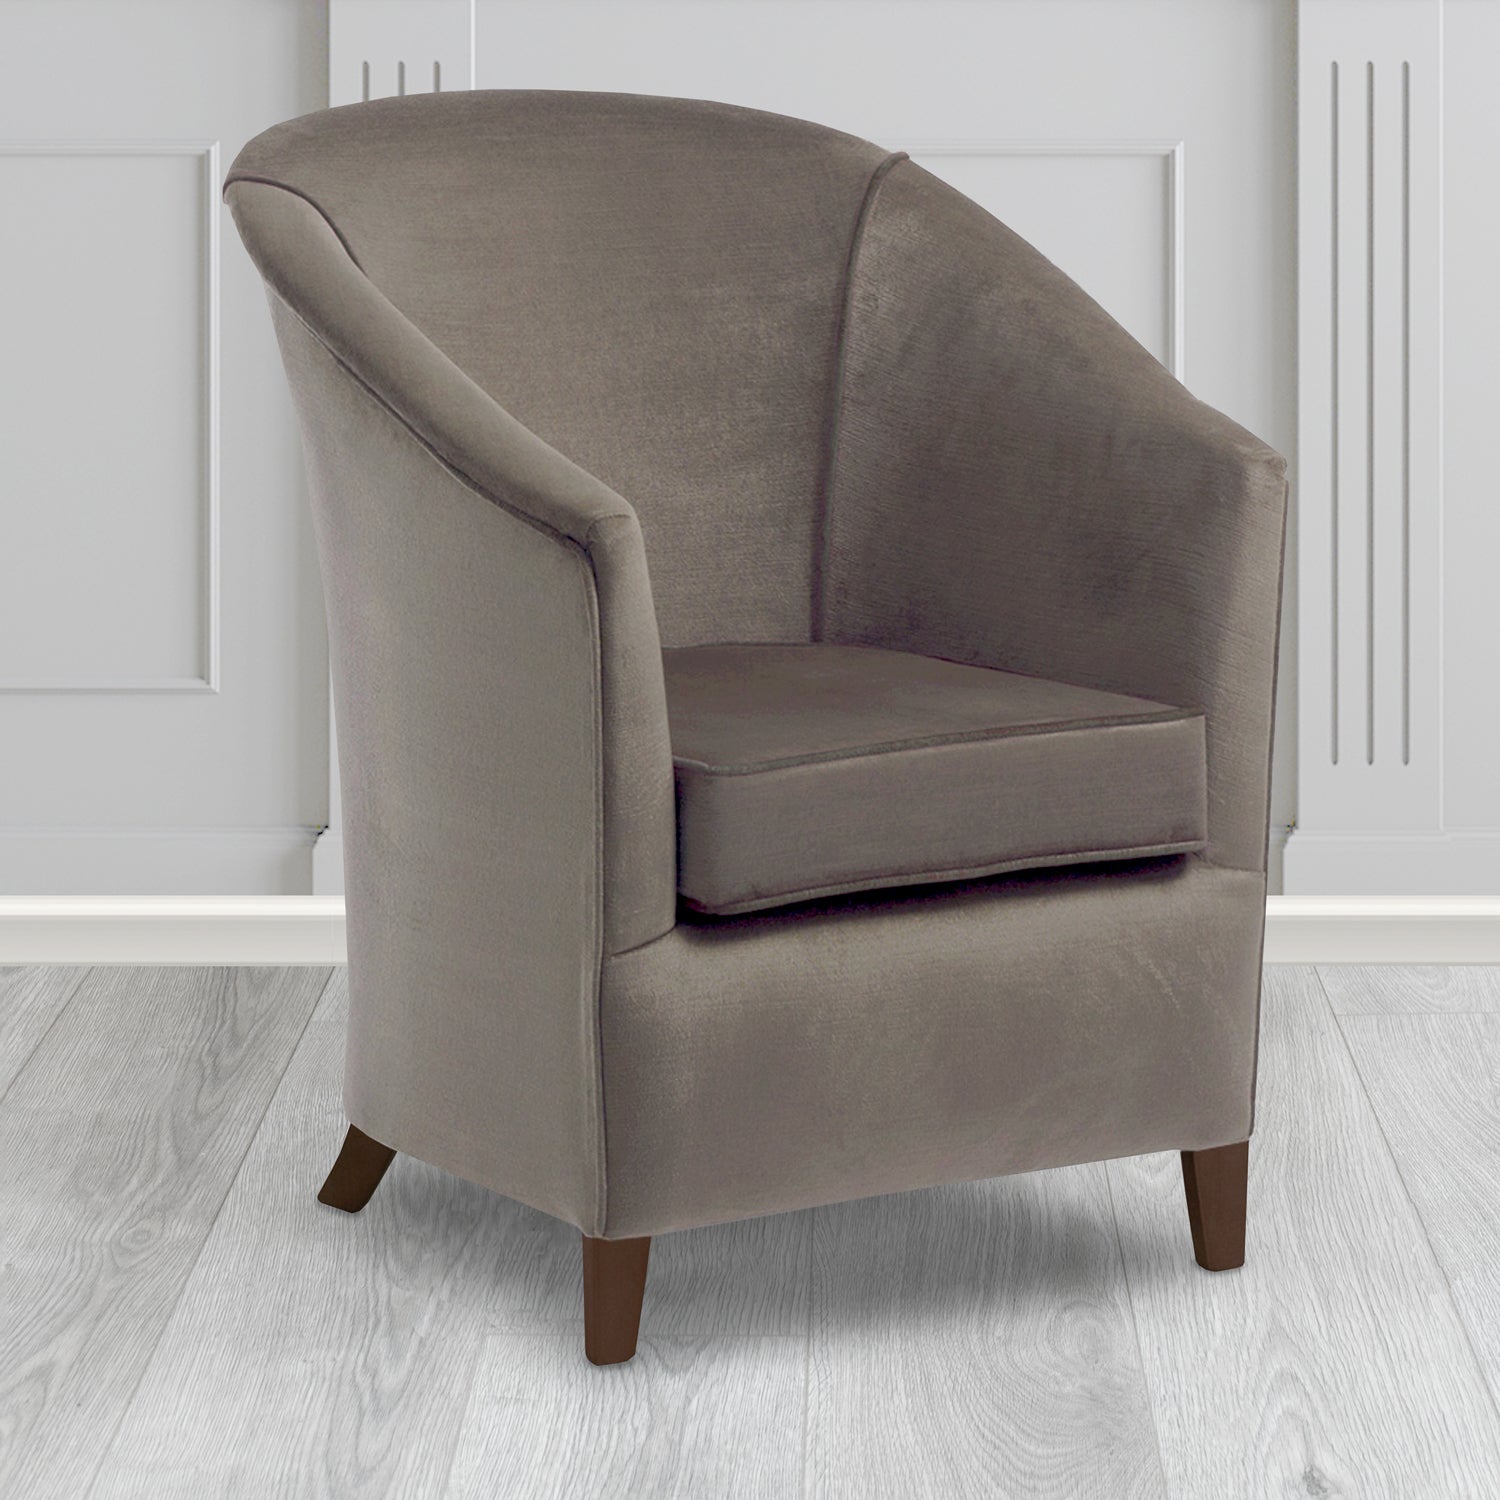 Bolton Tub Chair in Noble 971 Nickel Crib 5 Velvet Fabric - Water Resistant - The Tub Chair Shop